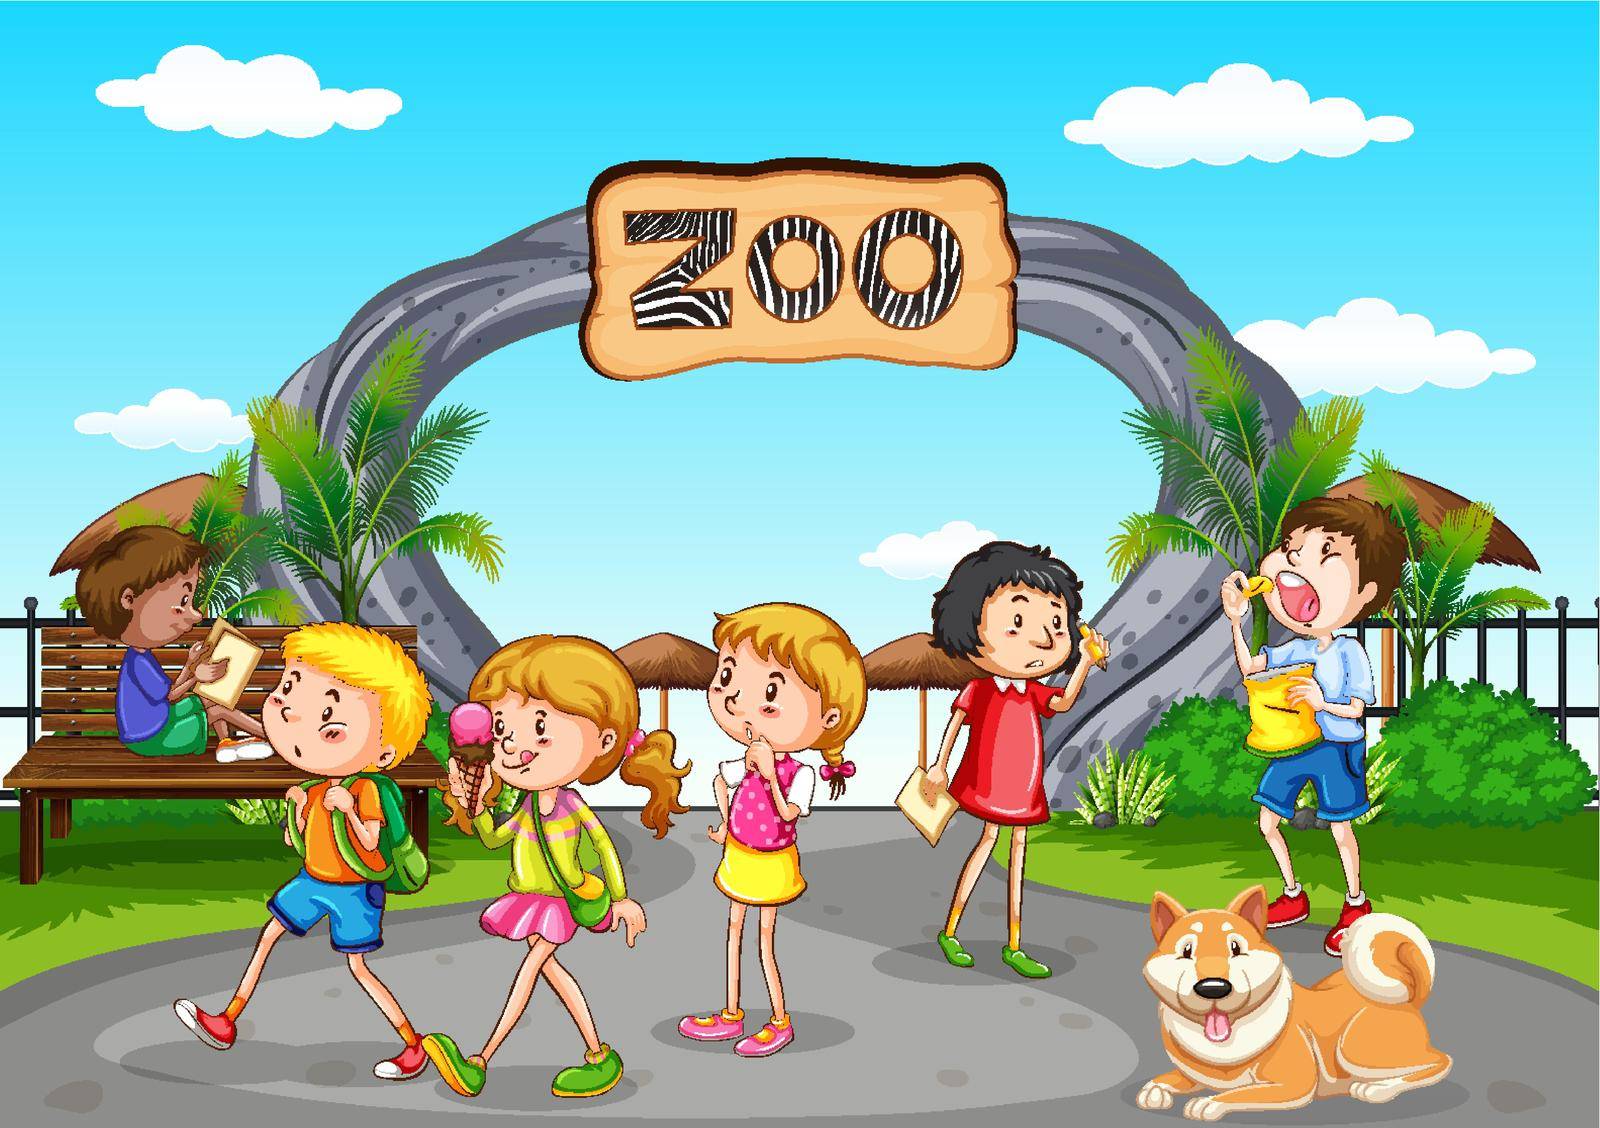 Scene with many children having fun at the zoo illustration